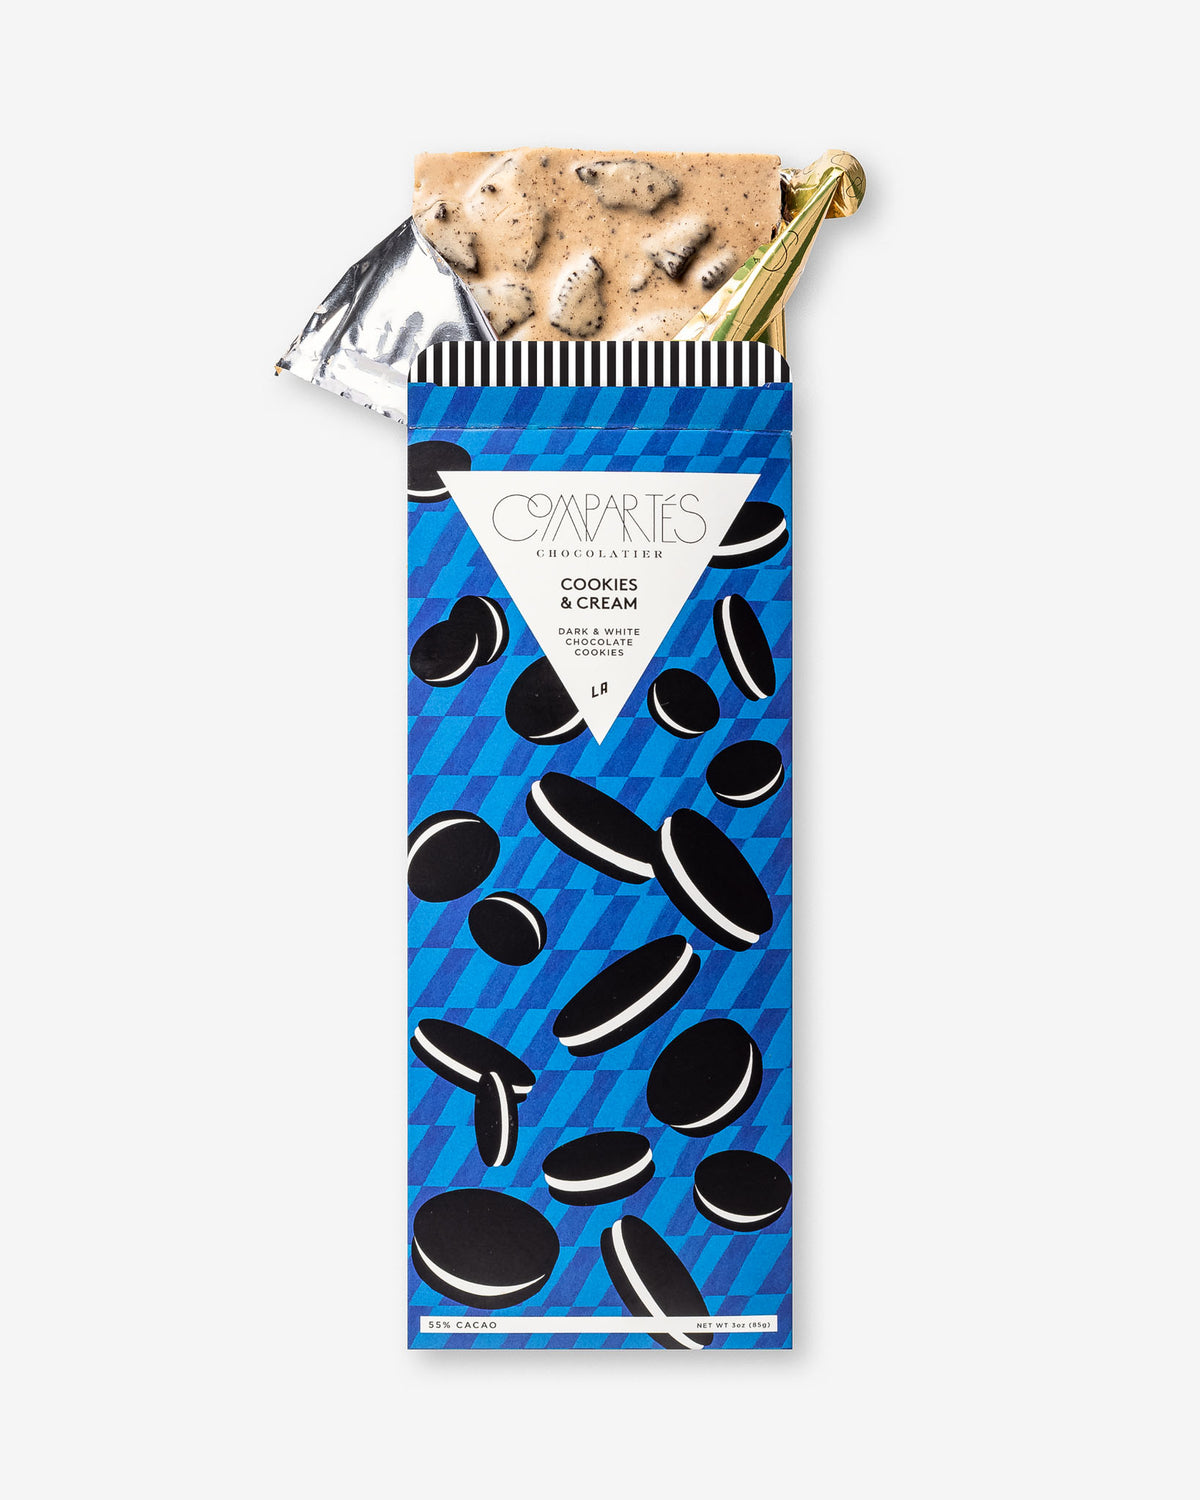 Luxury Chocolate Gifts by Compartes - Cookies & Cream Gourmet Chocolate Bar - Chocolate Oreo Cookies